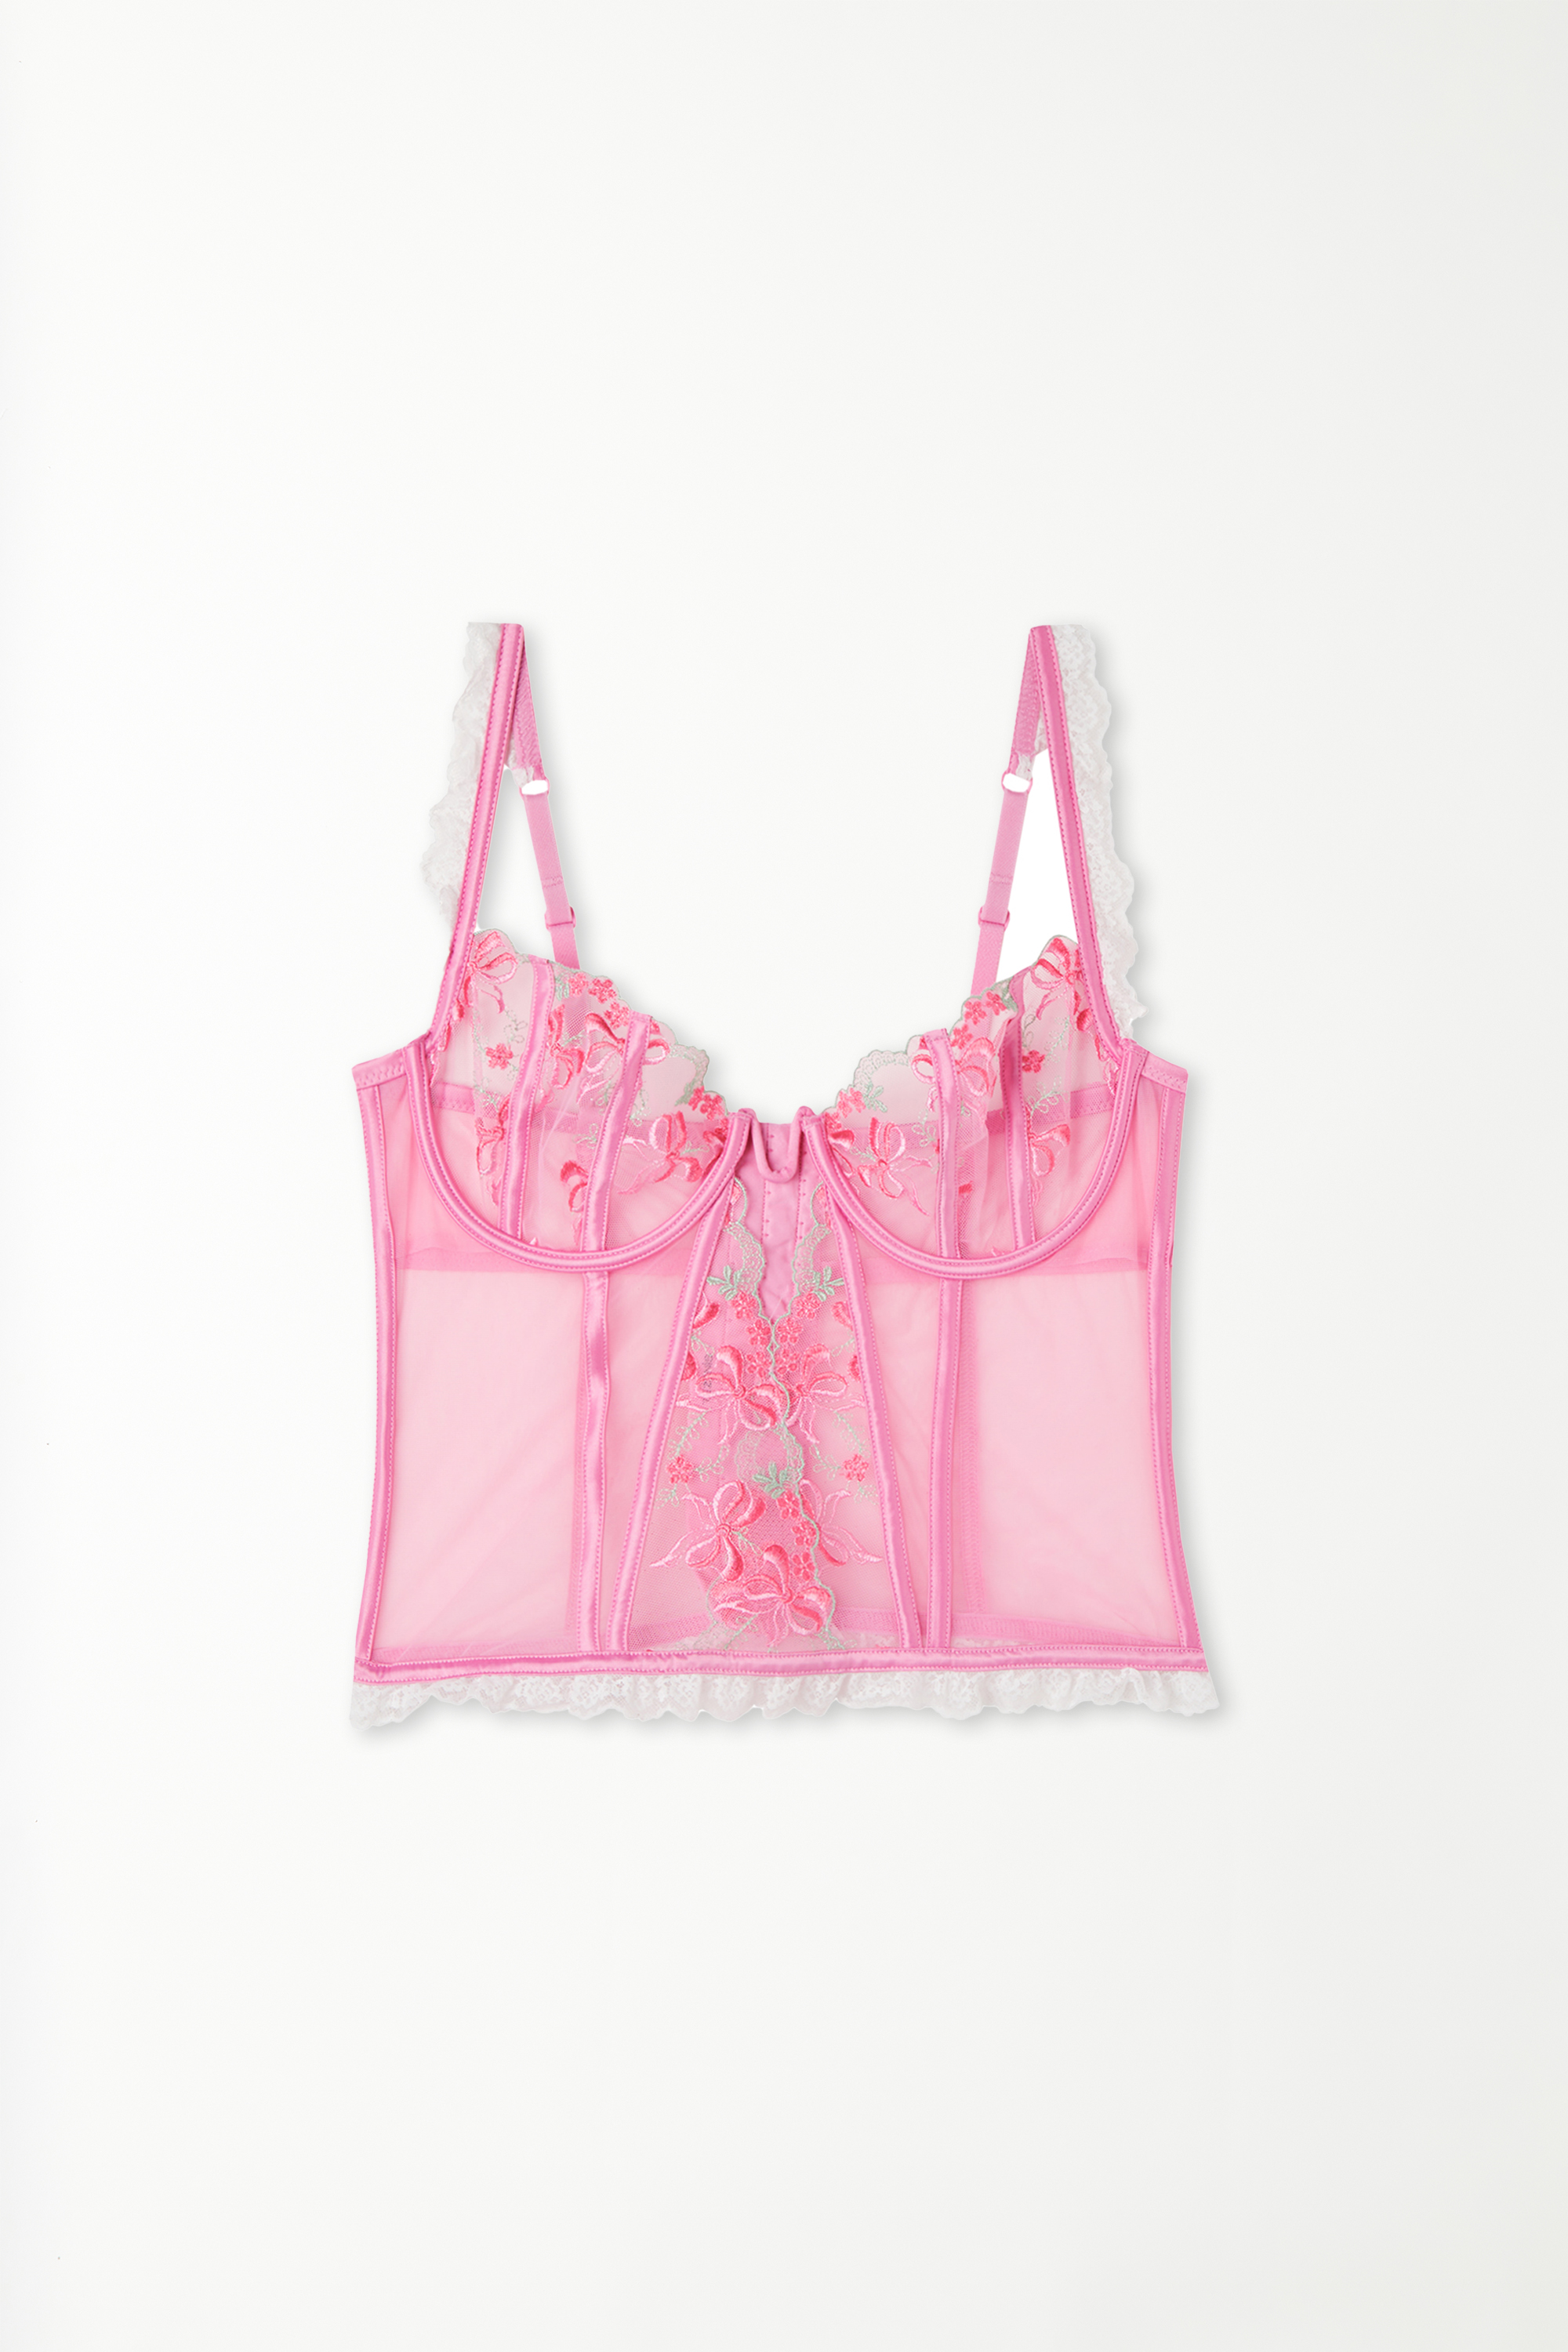 Corset Bra Top Balconette Pink Candy Lace